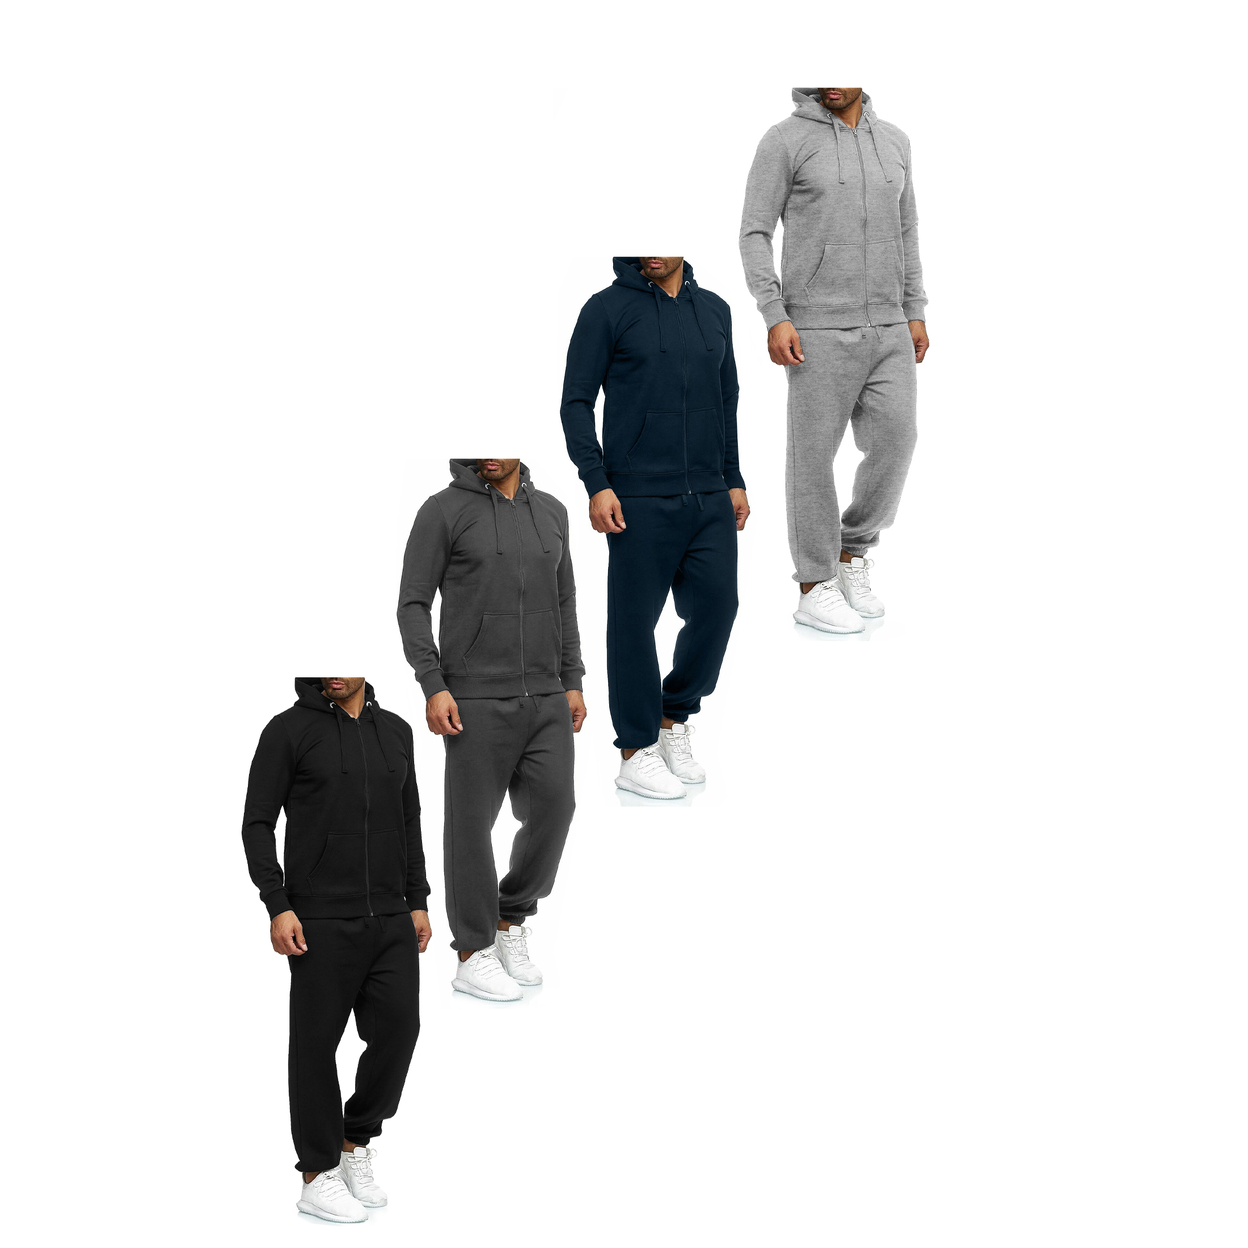 Multi-Pack: Men's Casual Big & Tall Athletic Active Winter Warm Fleece Lined Full Zip Tracksuit Jogger Set - Grey, 2-pack, 3xl